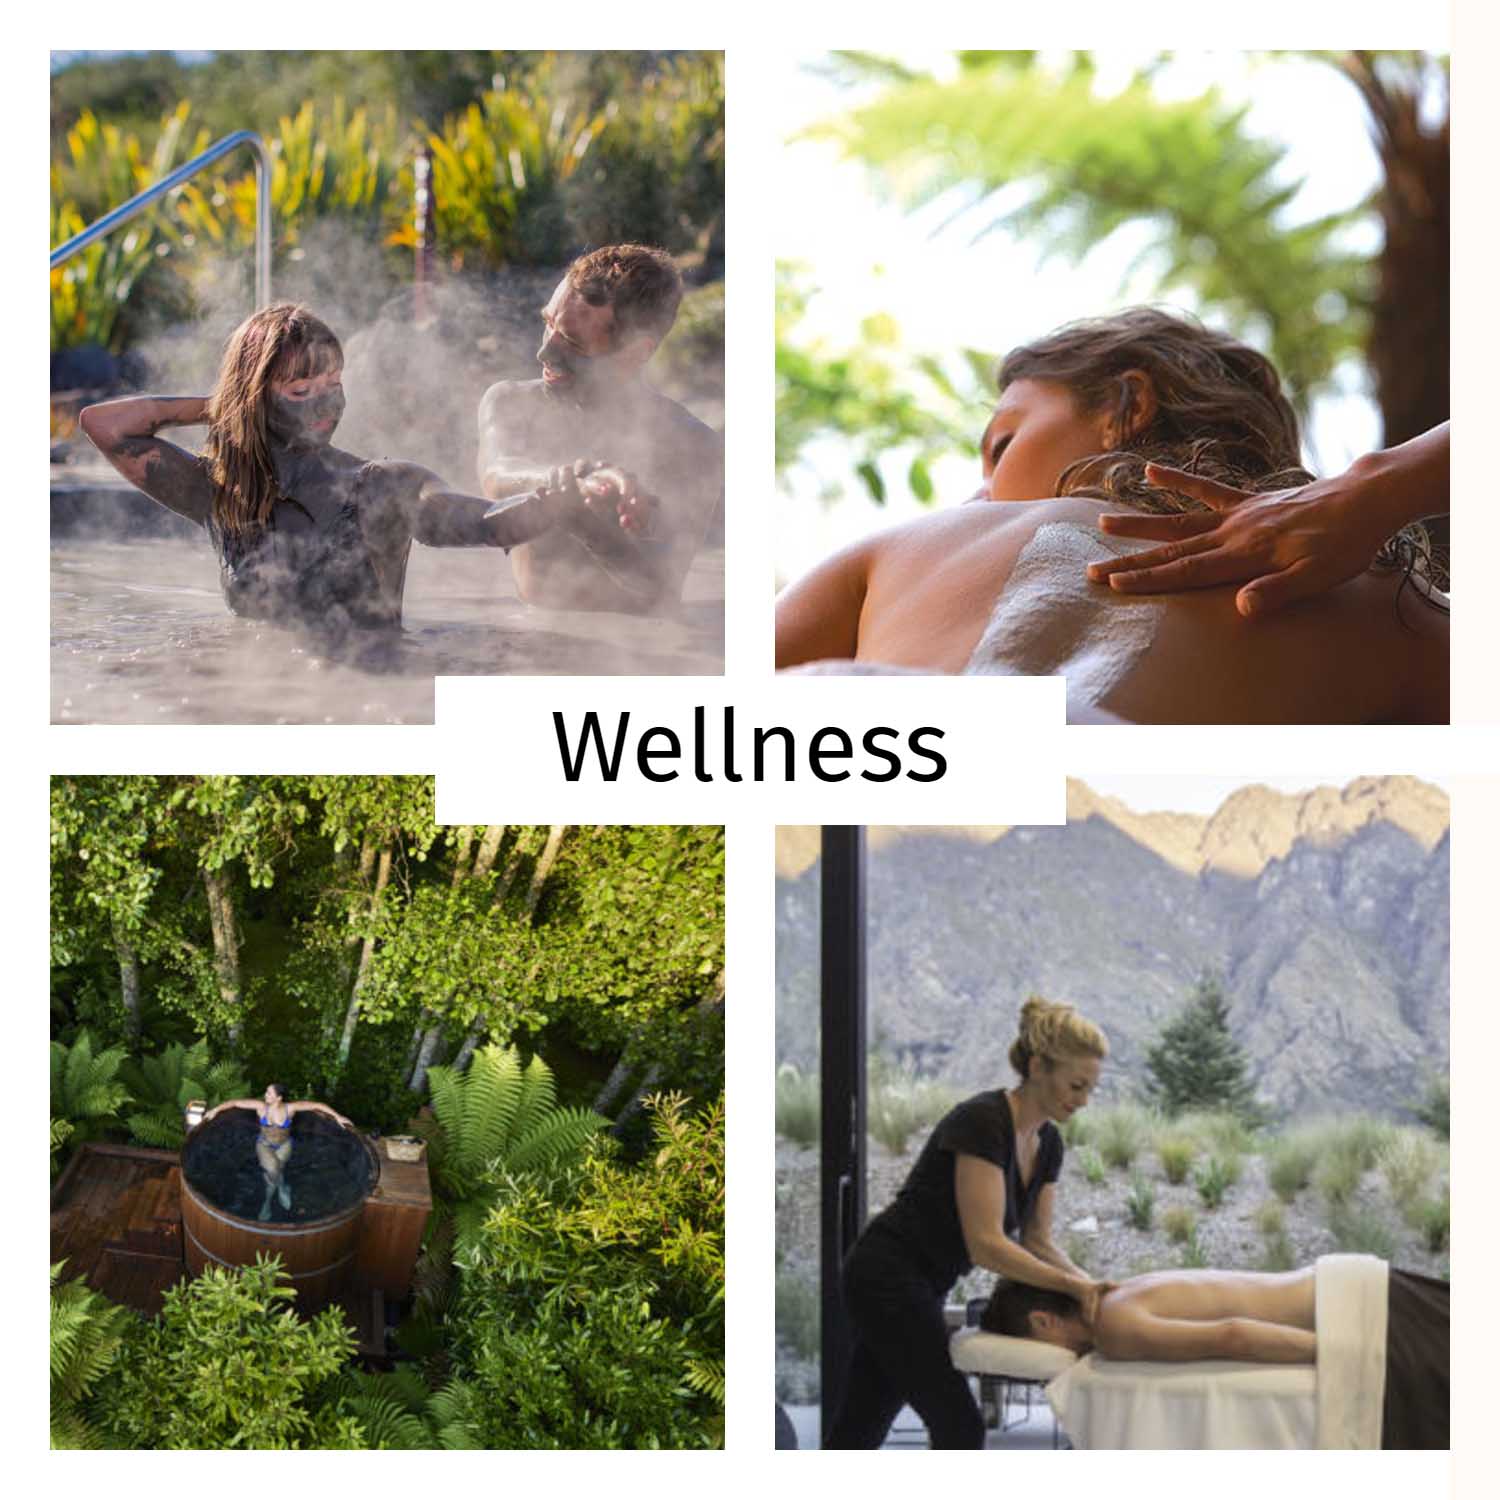 Will they choose a health and wellness experience?